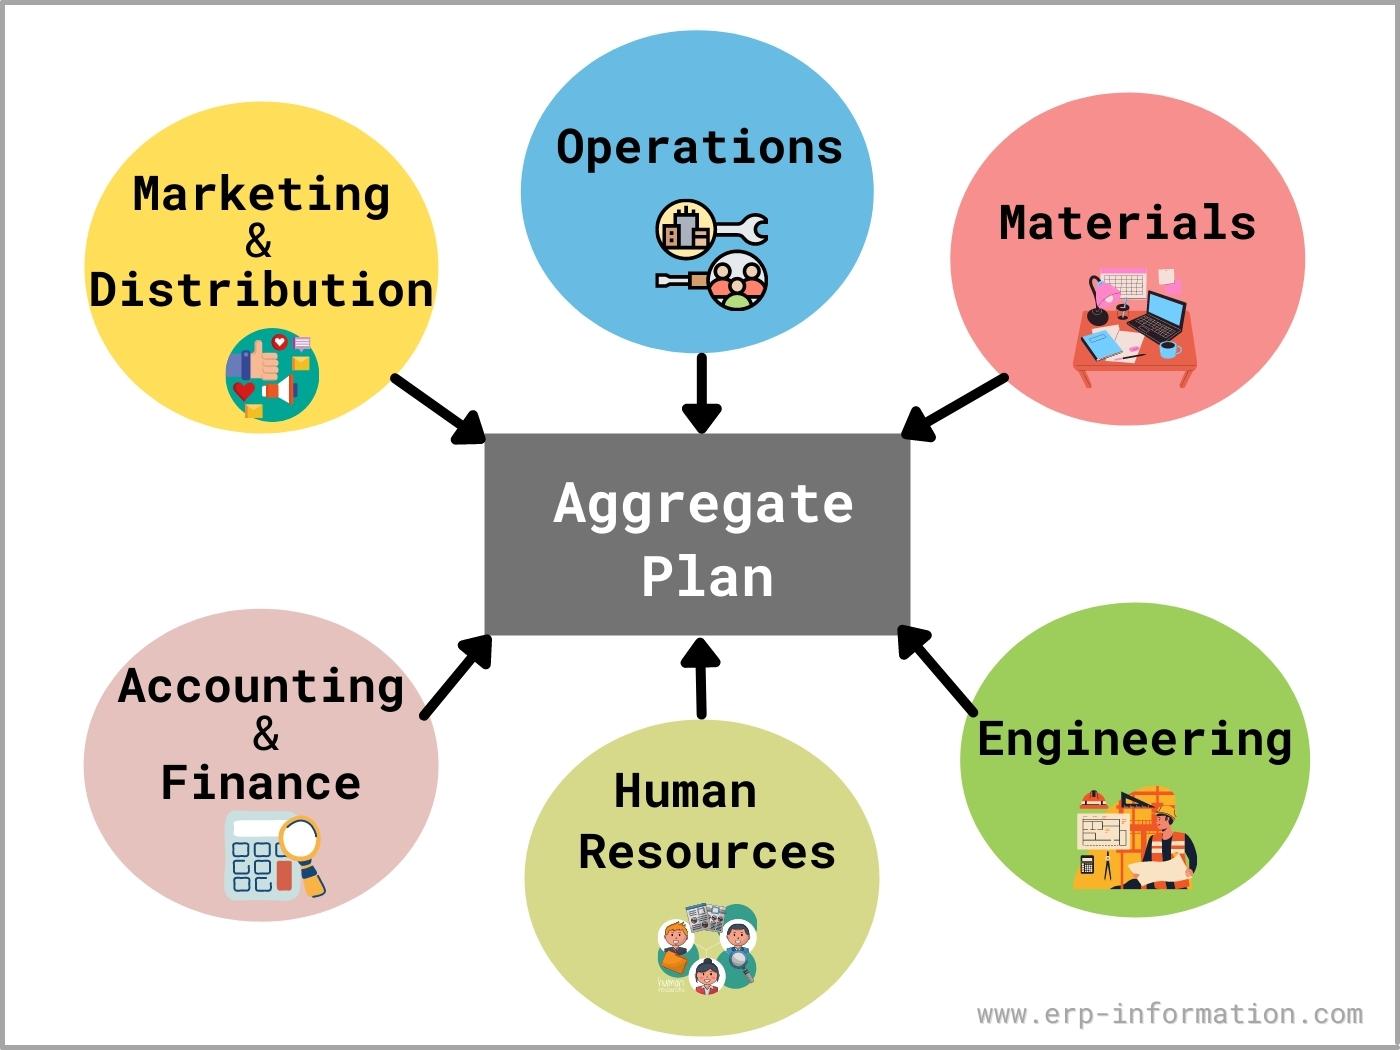 aggregate sales and operations planning